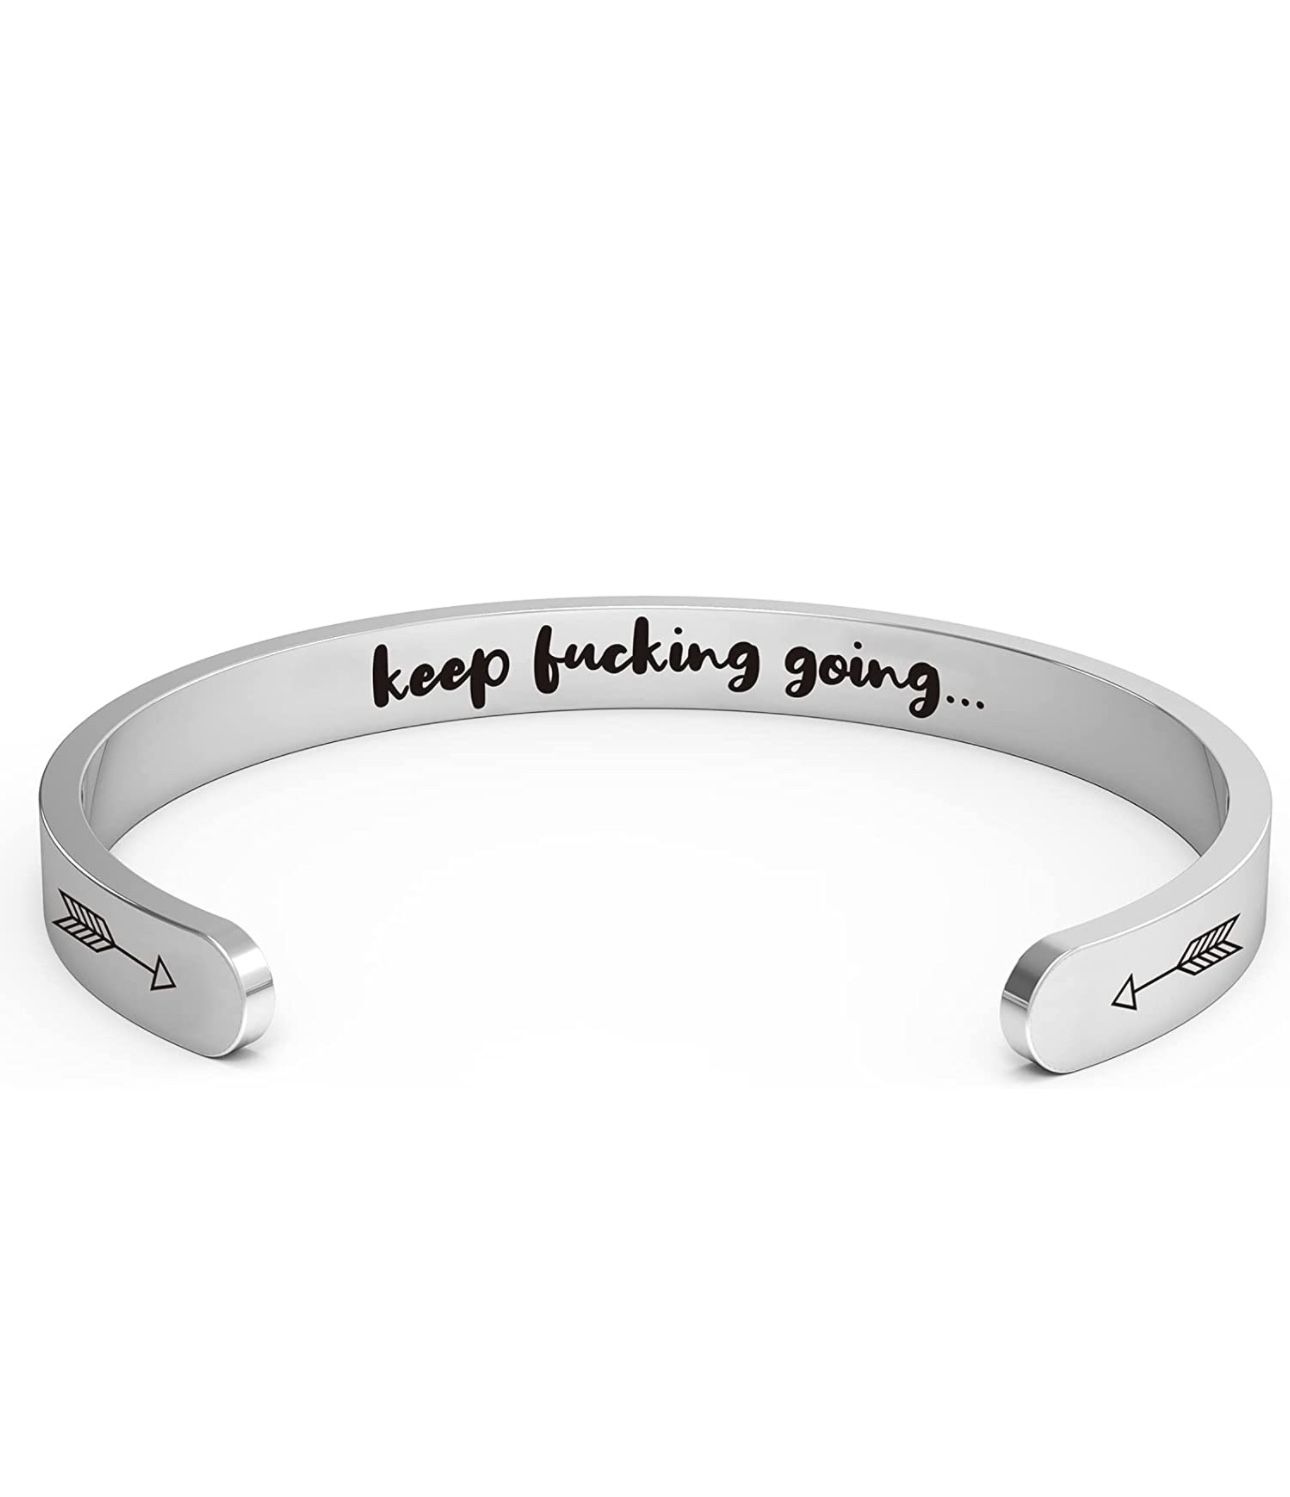 Gifts for Her Women Mom Wife Girlfriend BFF Sister Daughter Best Friends, Inspirational Personalized Bracelets for Teen Girls Jewelry, Funny Gag Gifts